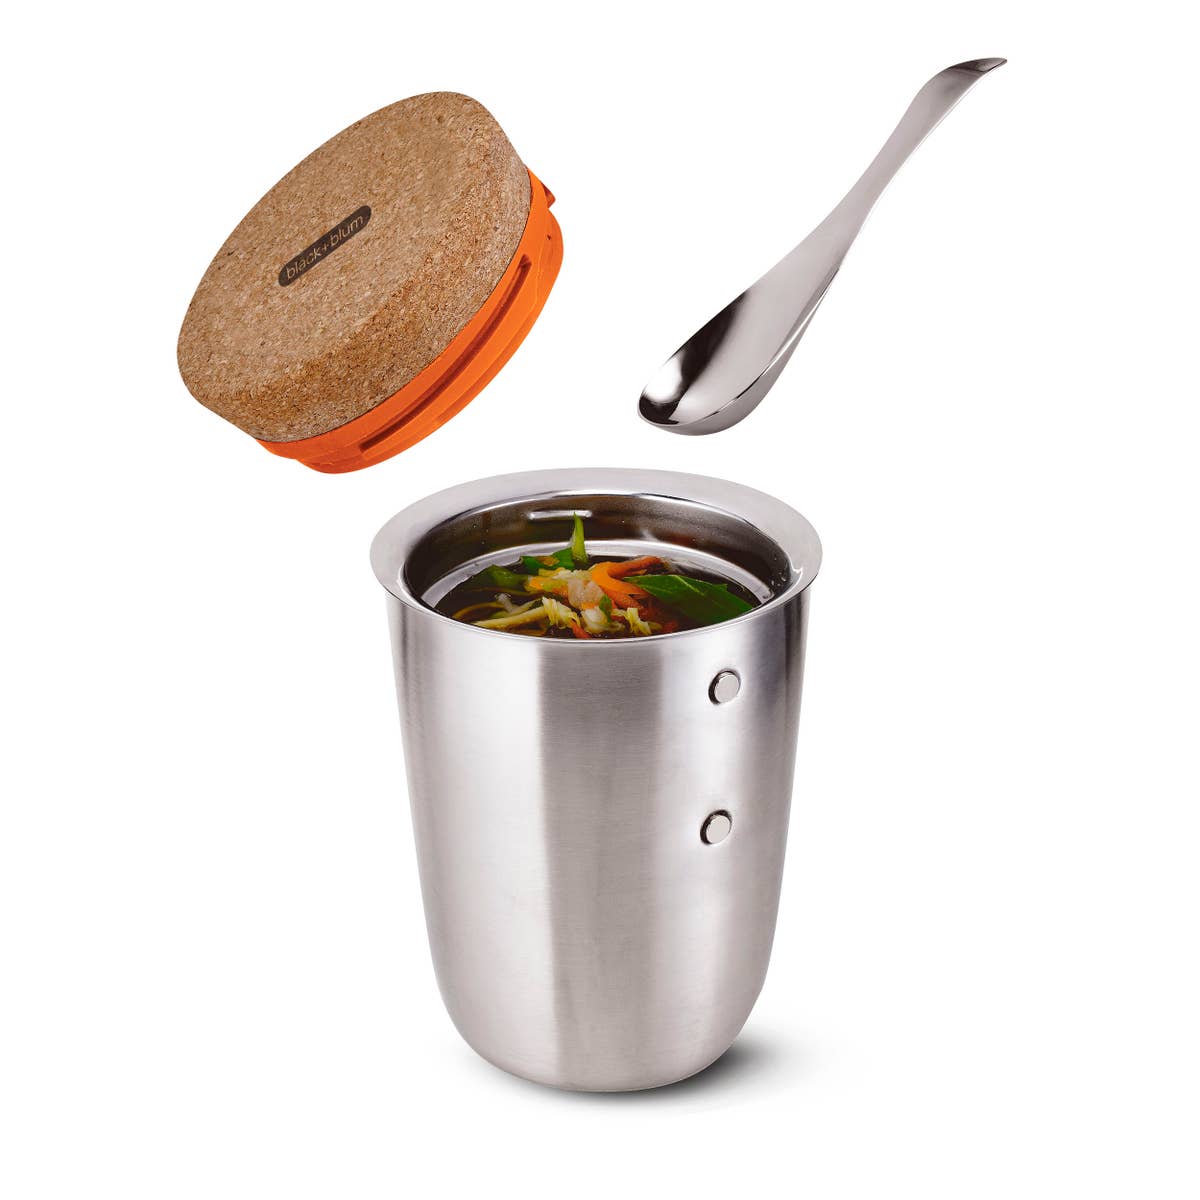 Black + Blum | Thermo Pot - Stainless Steel Cork Top Vacuum Sealed Insulated Thermos Soup & Lunch Food Travel Container With Magnetic Spoon Attachment, Camping Cookware, Black + Blum, Defiance Outdoor Gear Co.